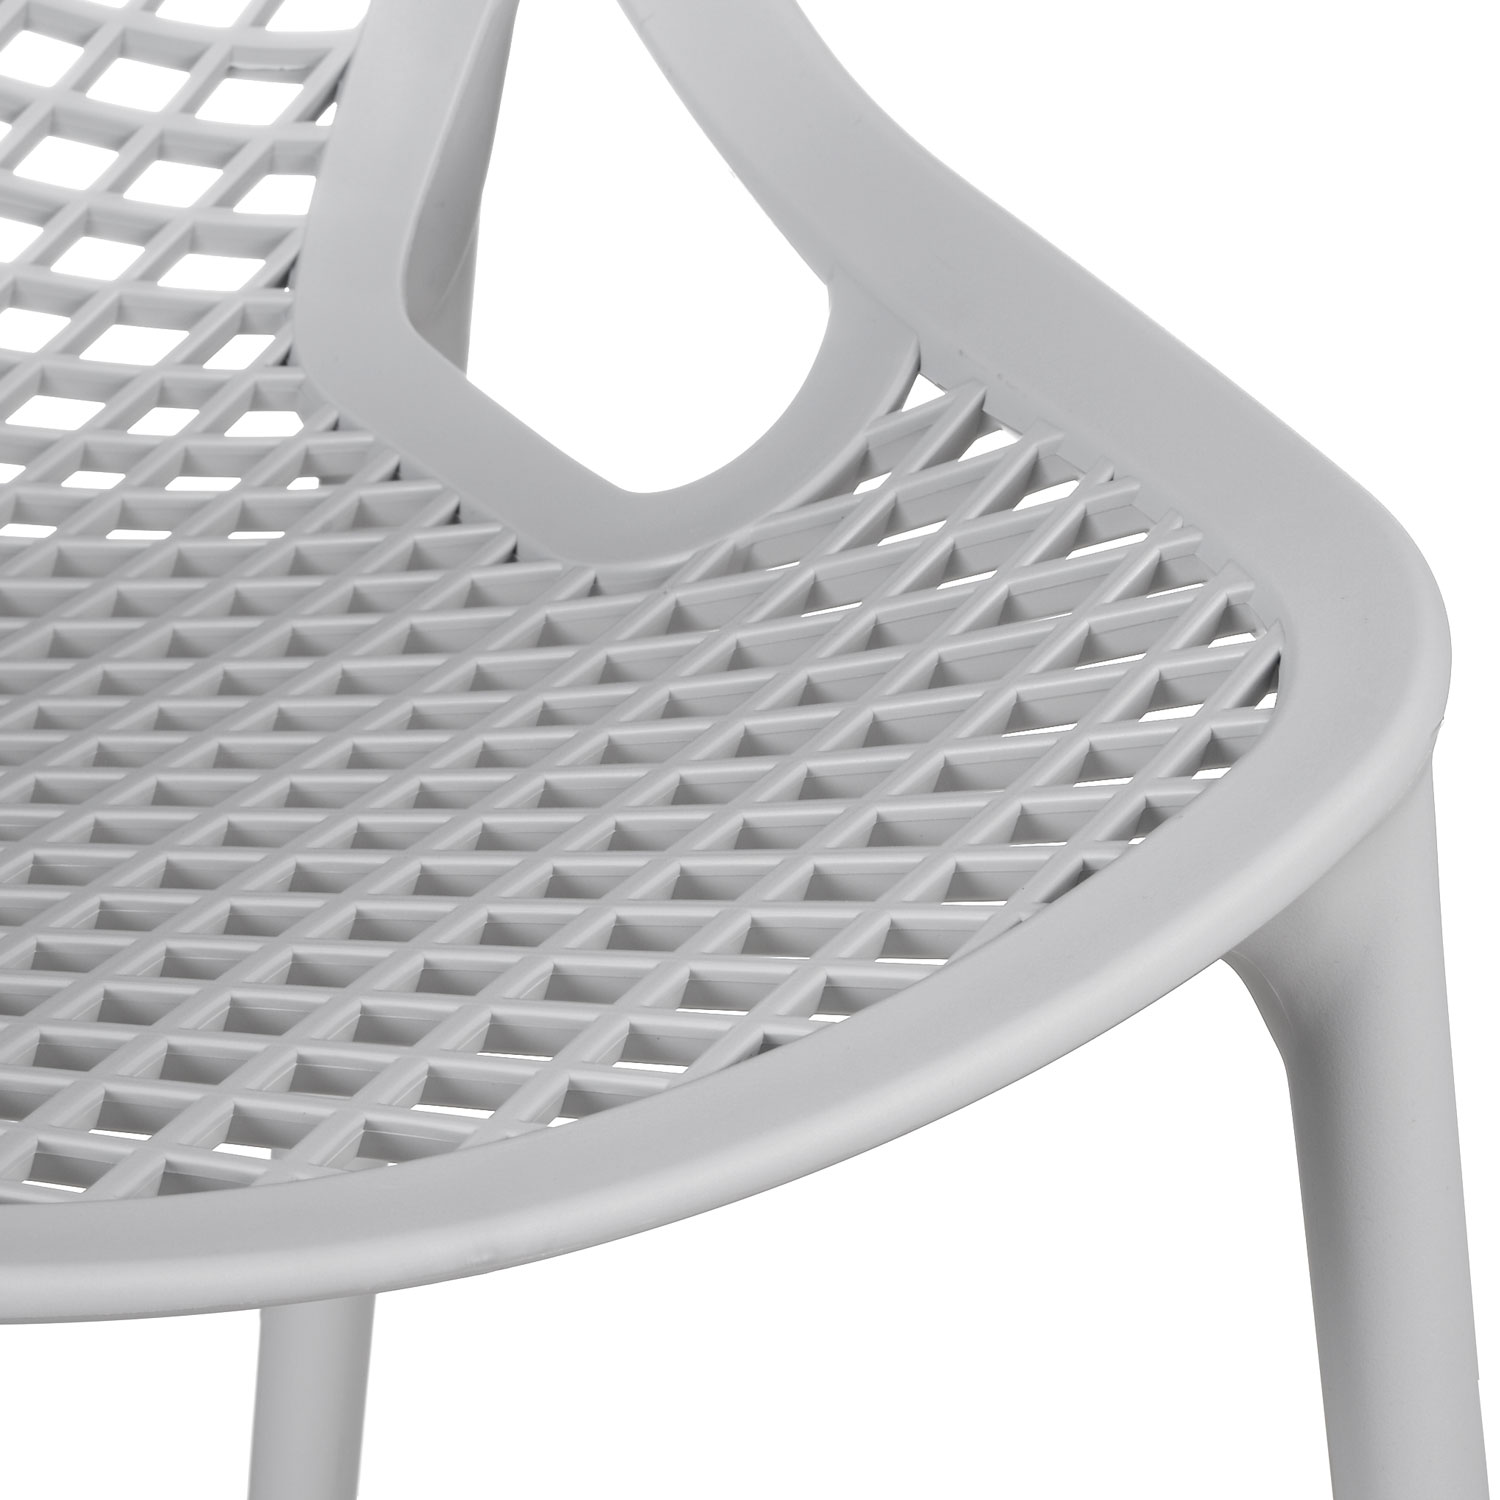 Garden chair Set of 6 Camping chairs Grey Outdoor chairs Plastic Egg chair Lounger chairs Stacking chairs